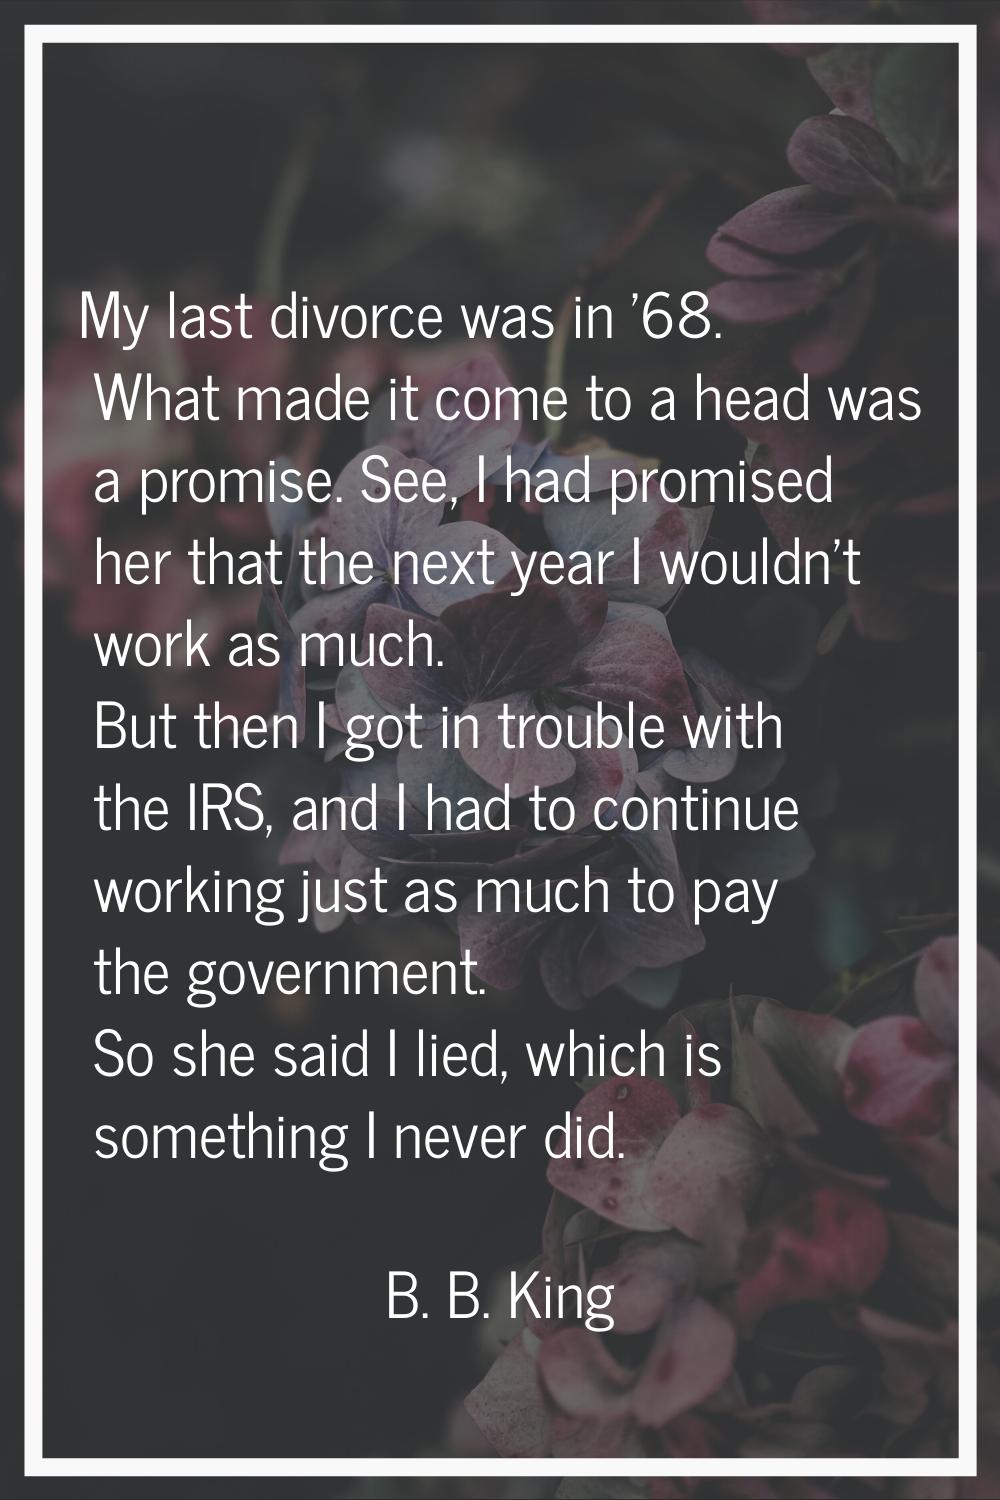 My last divorce was in '68. What made it come to a head was a promise. See, I had promised her that